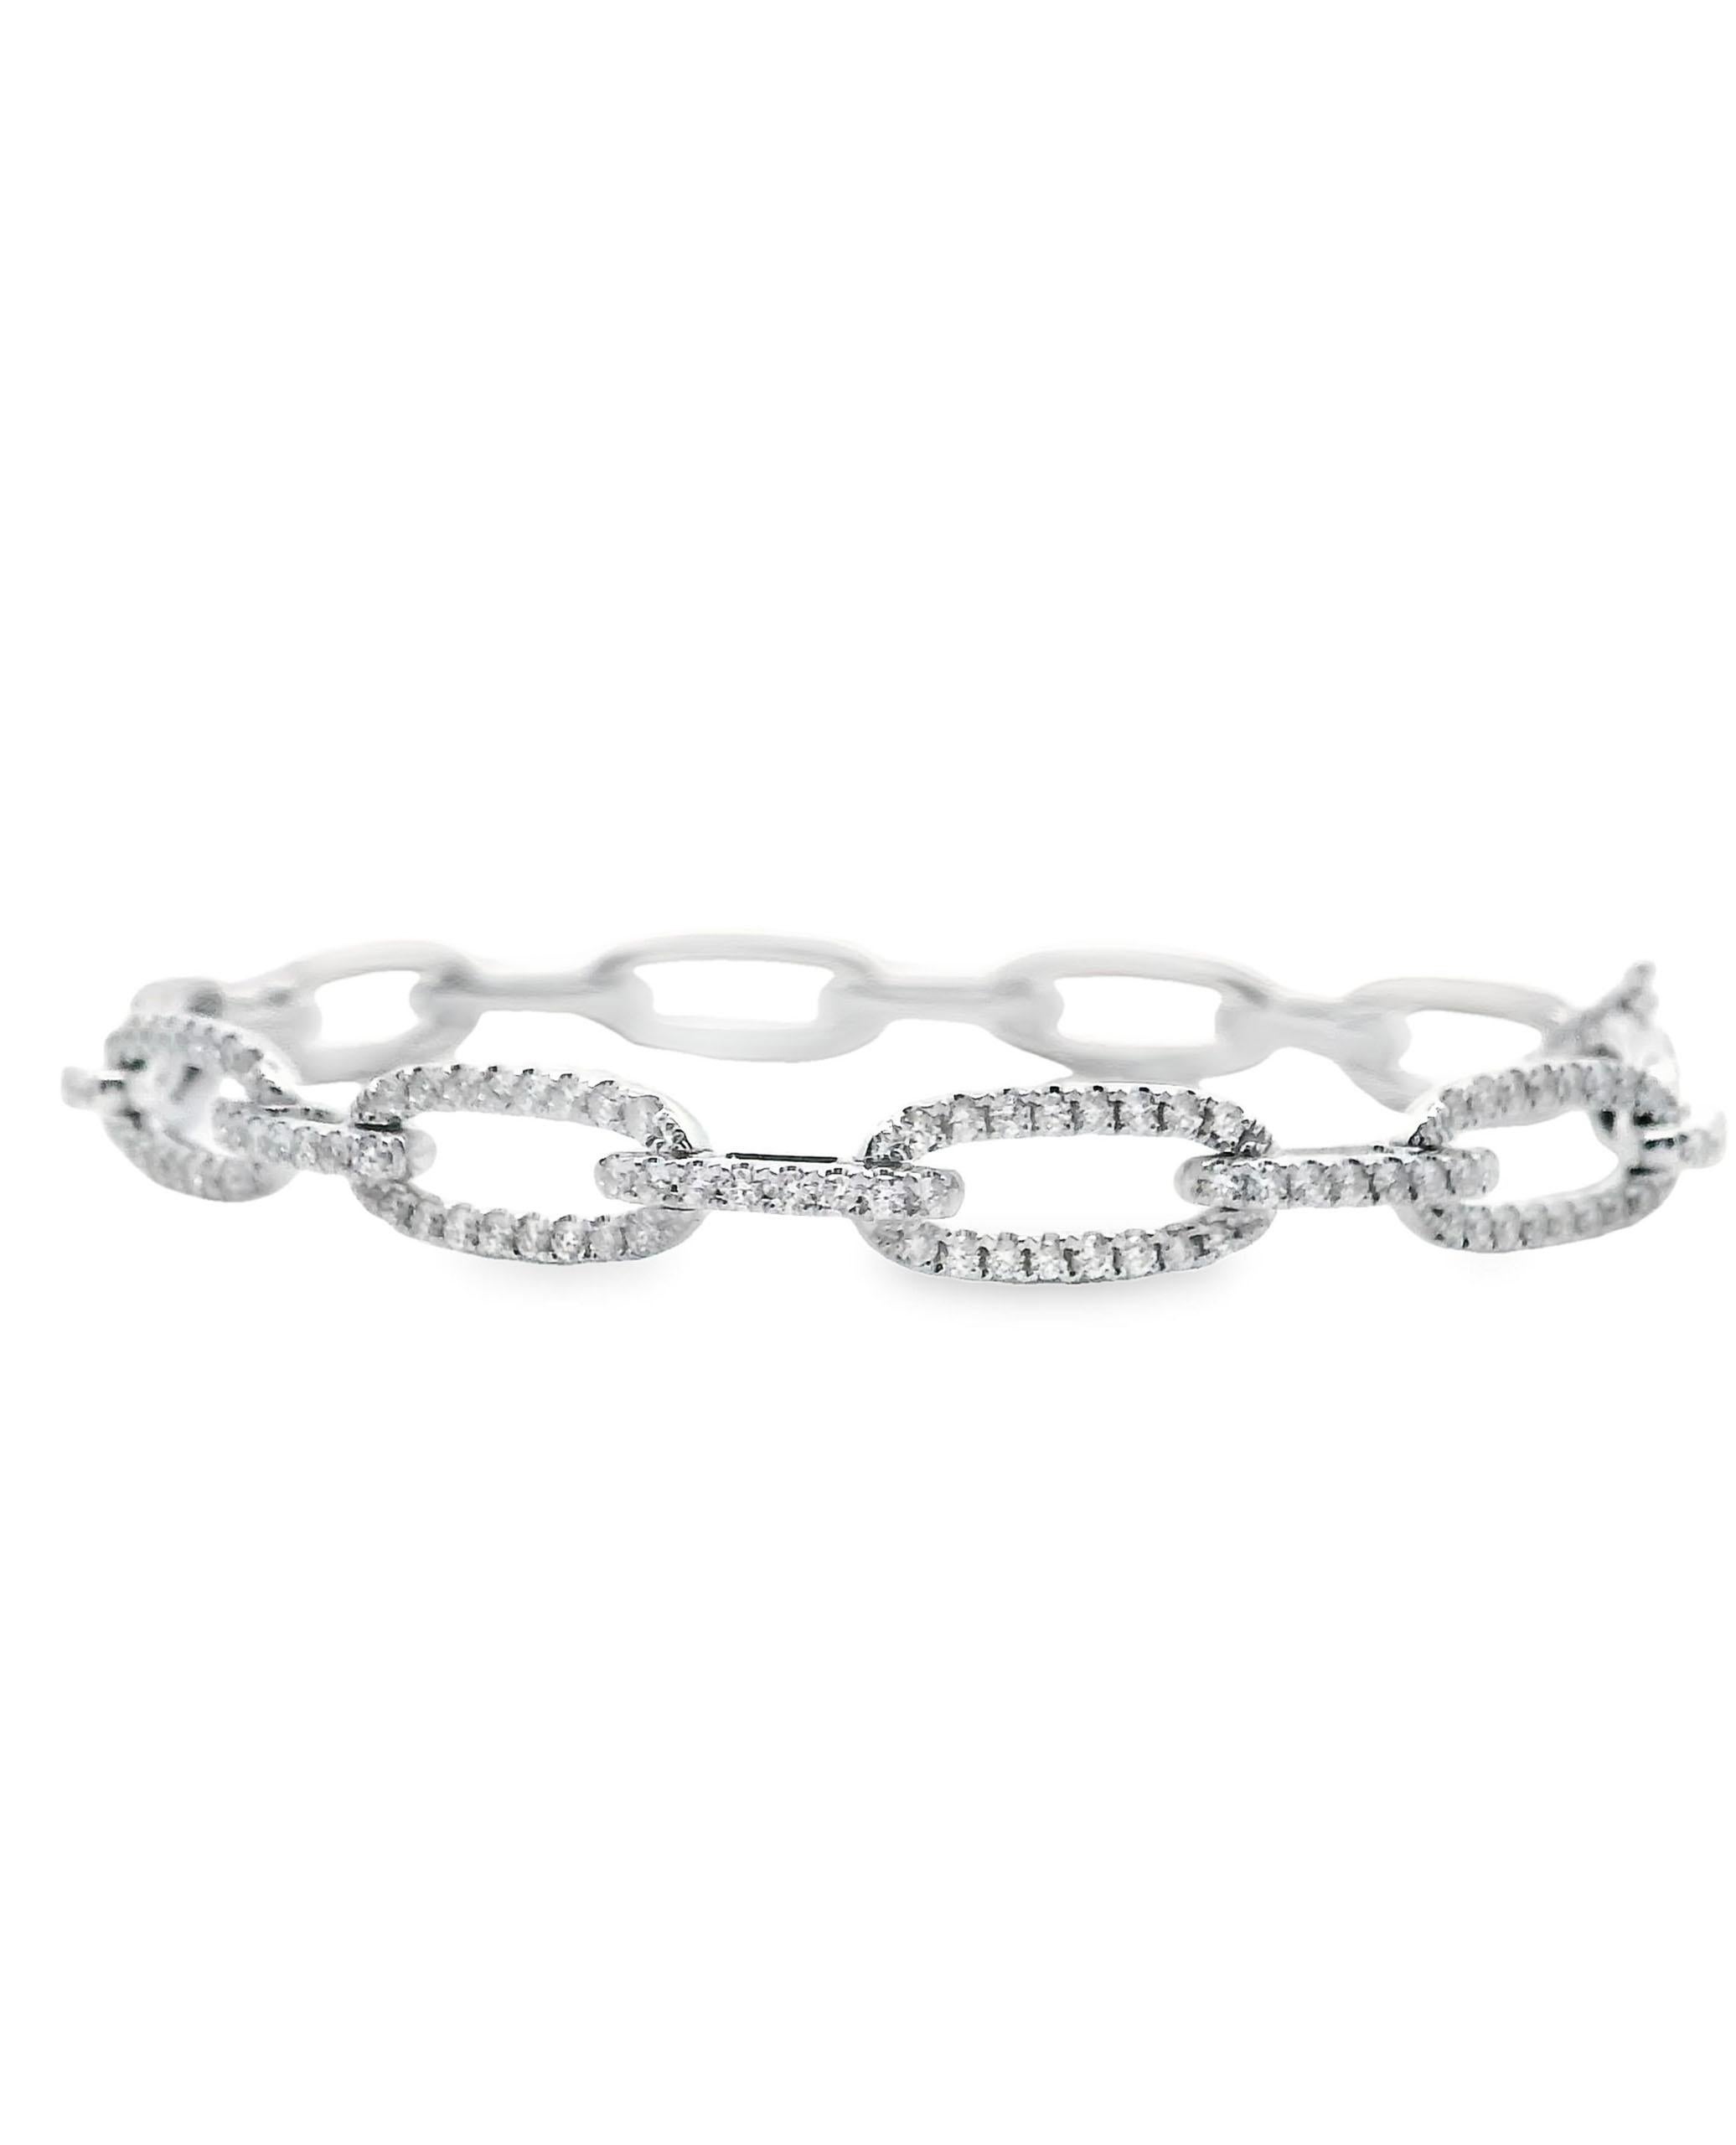 18K white gold open link bracelet with 240 round brilliant-cut diamonds weighing 1.95 carats total.

- Diamonds are G/H color, VS2/SI1 clarity.